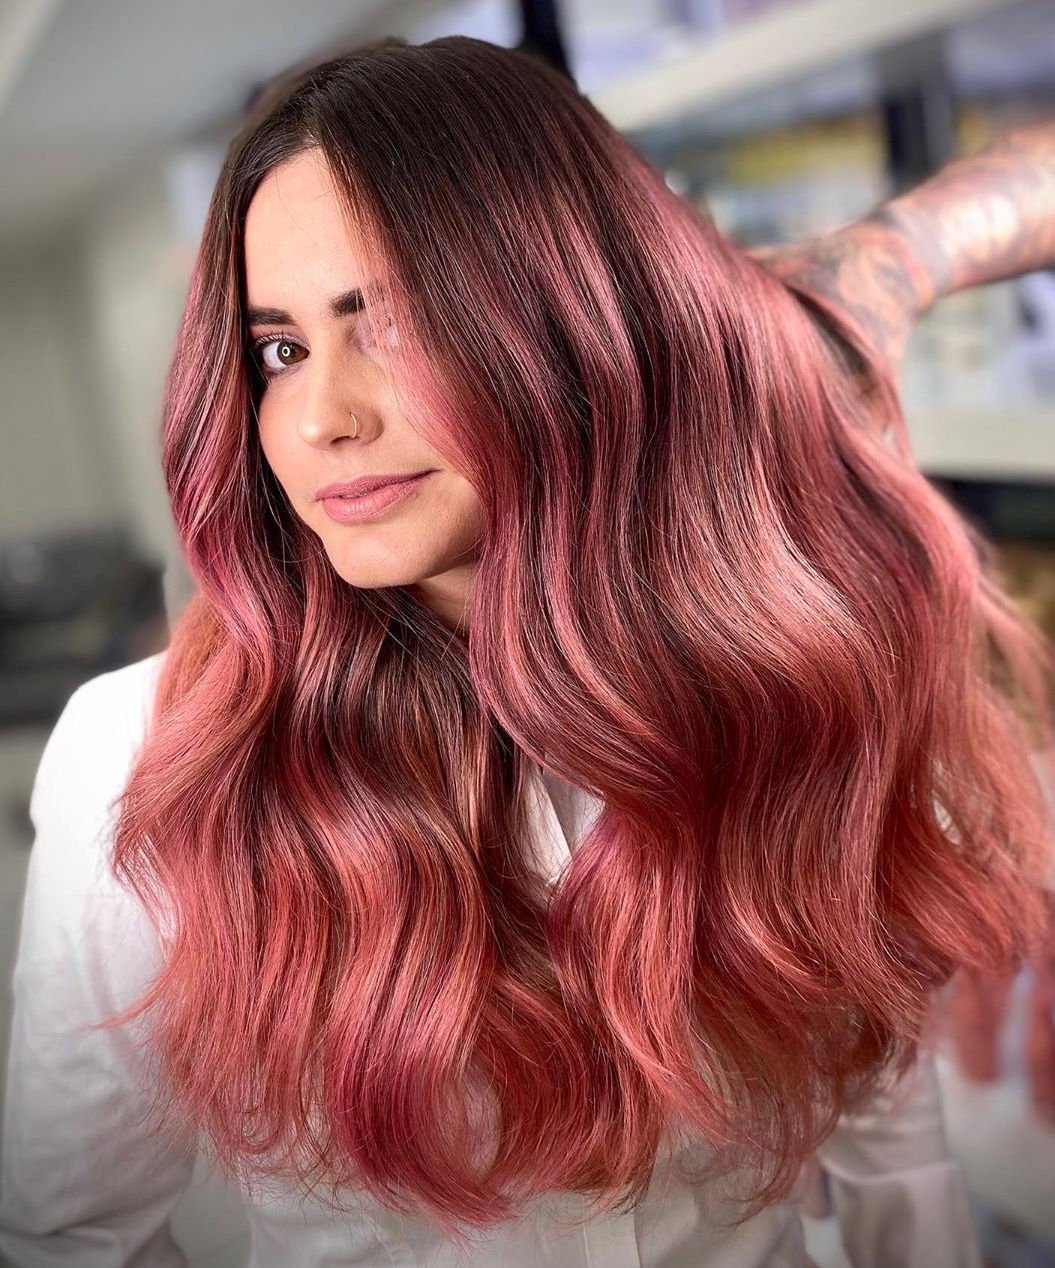 The 15 Best Pink Hair Dyes - 2023's Top Picks